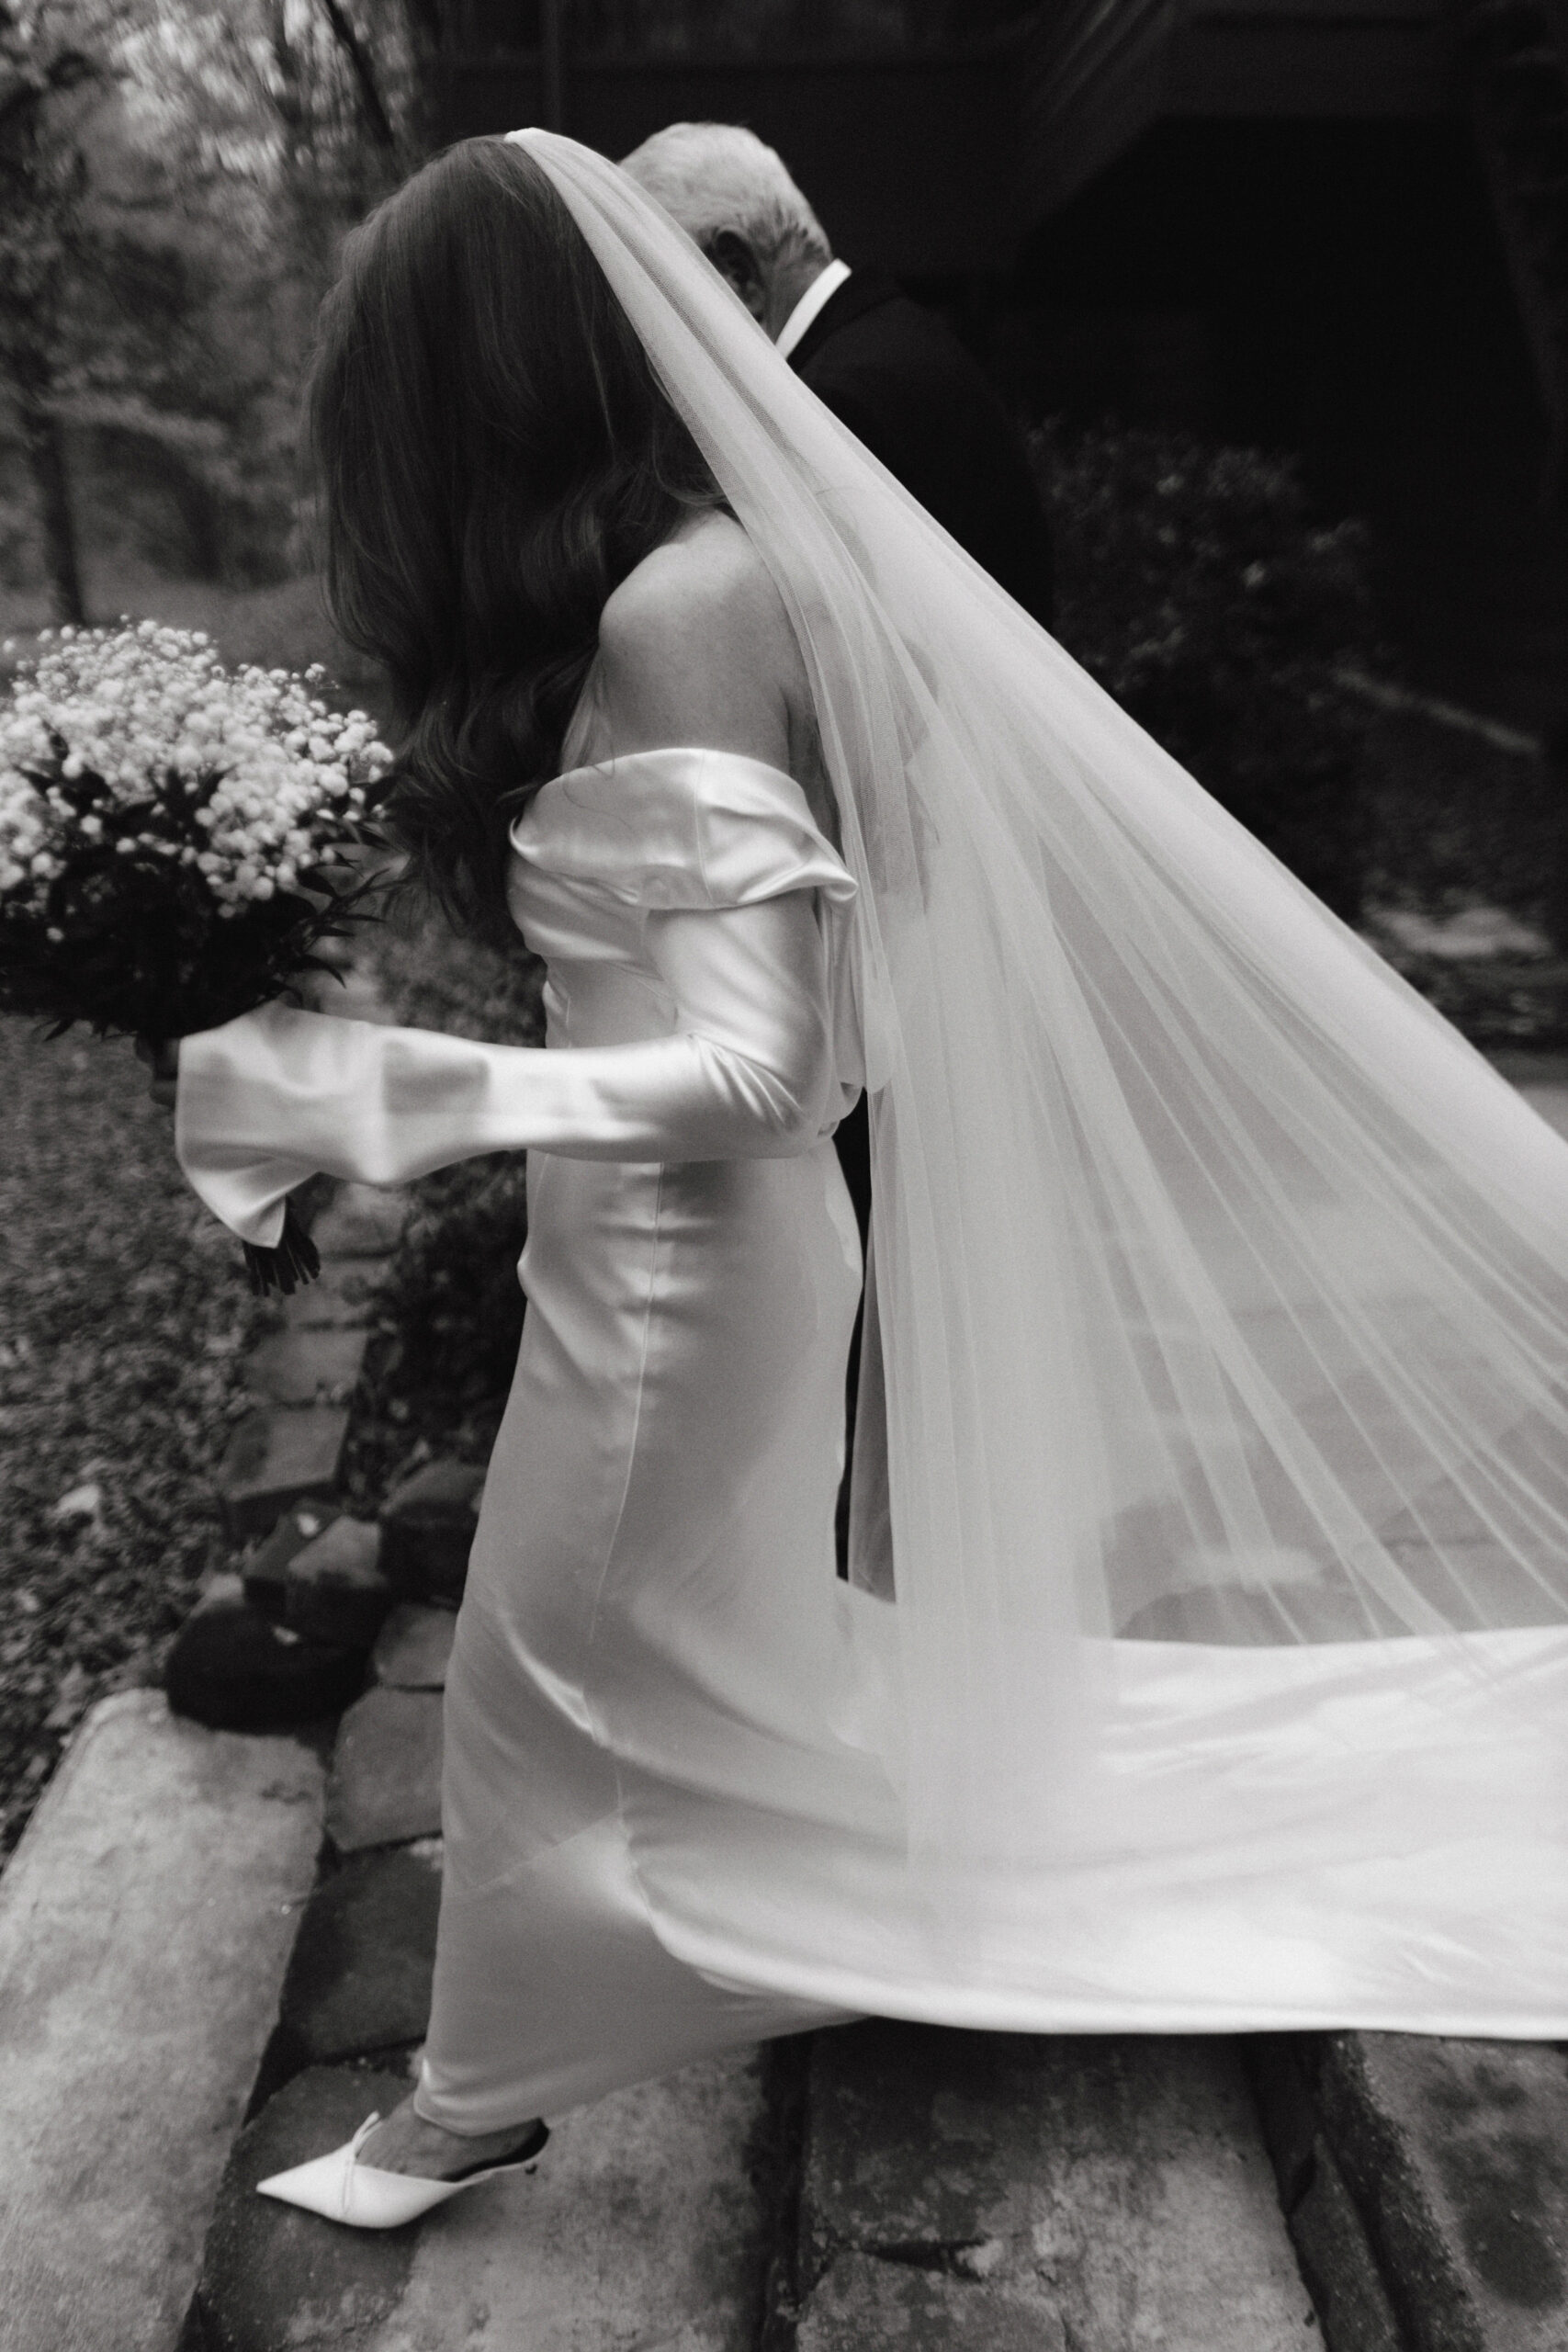 Black and white, documentary wedding photography photo of the bride going down the stairs. Image by Jenny Fu Studio